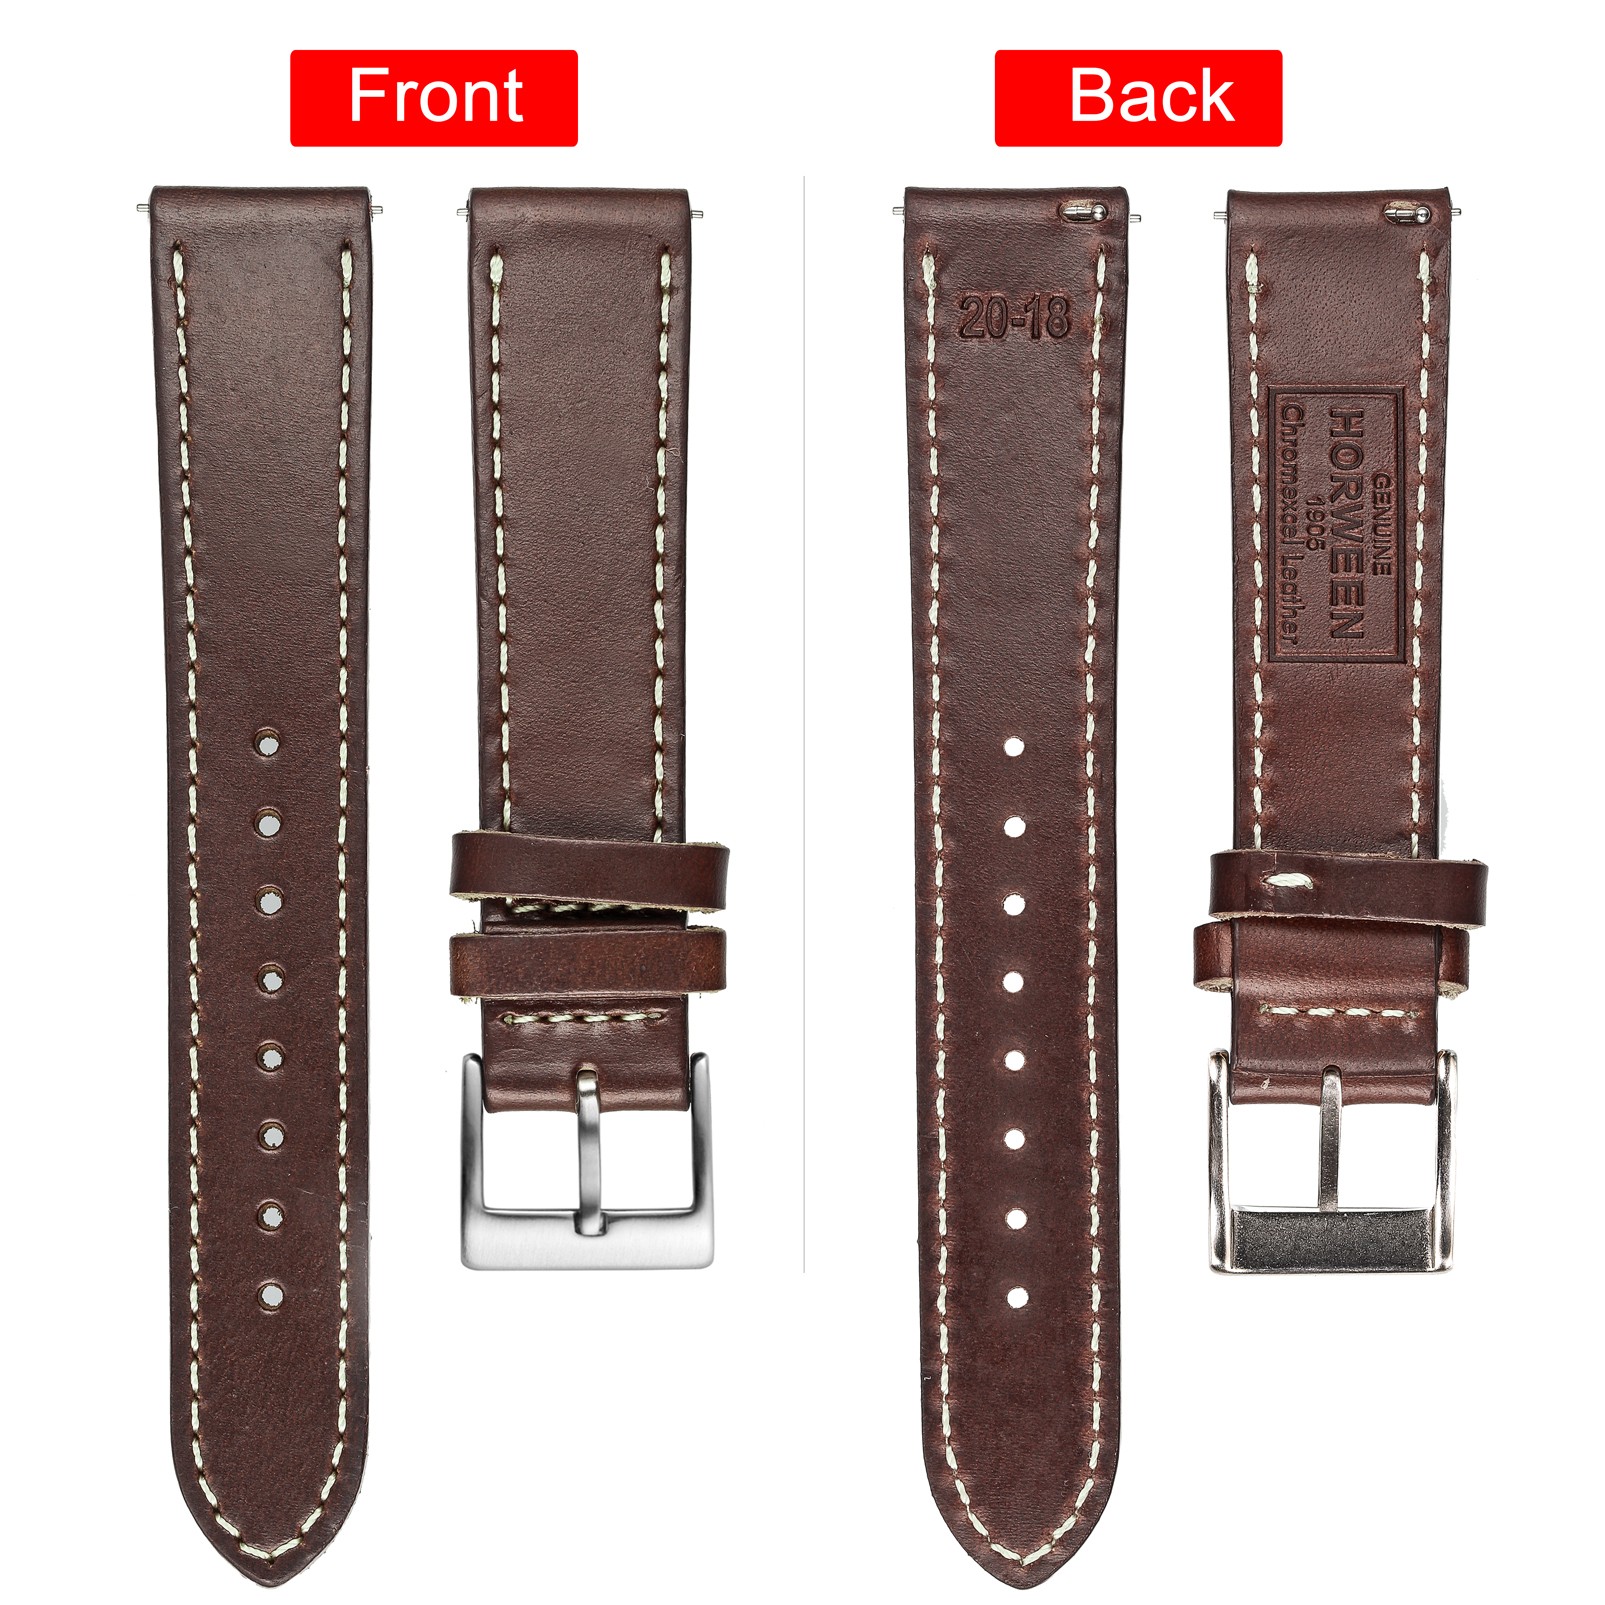 High Quality Horween Chromexcel Leather Straps Brown Soft Wrap Handmade Watch Bands 18mm 20mm 22mm